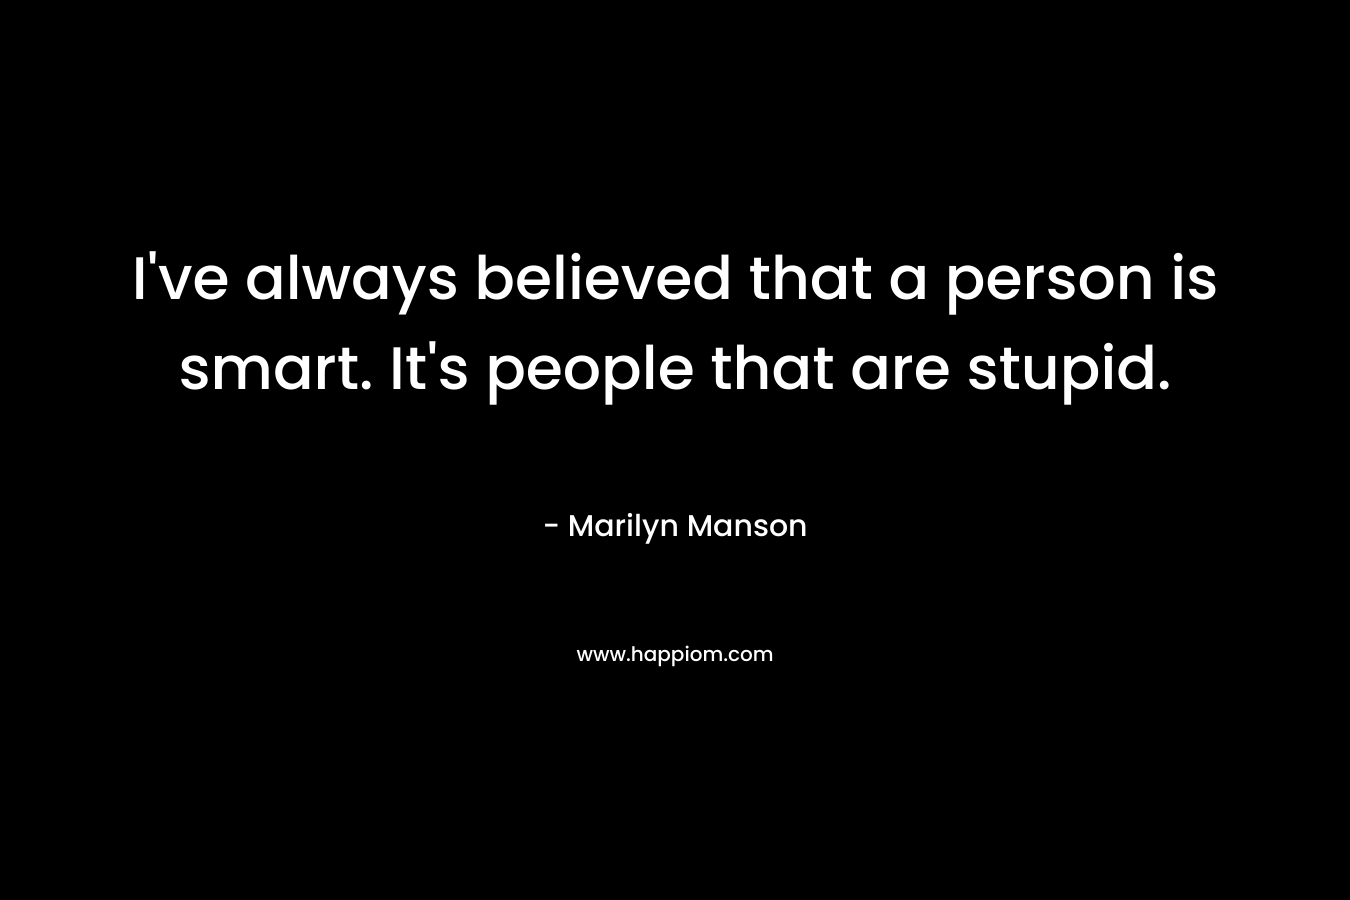 I’ve always believed that a person is smart. It’s people that are stupid. – Marilyn Manson